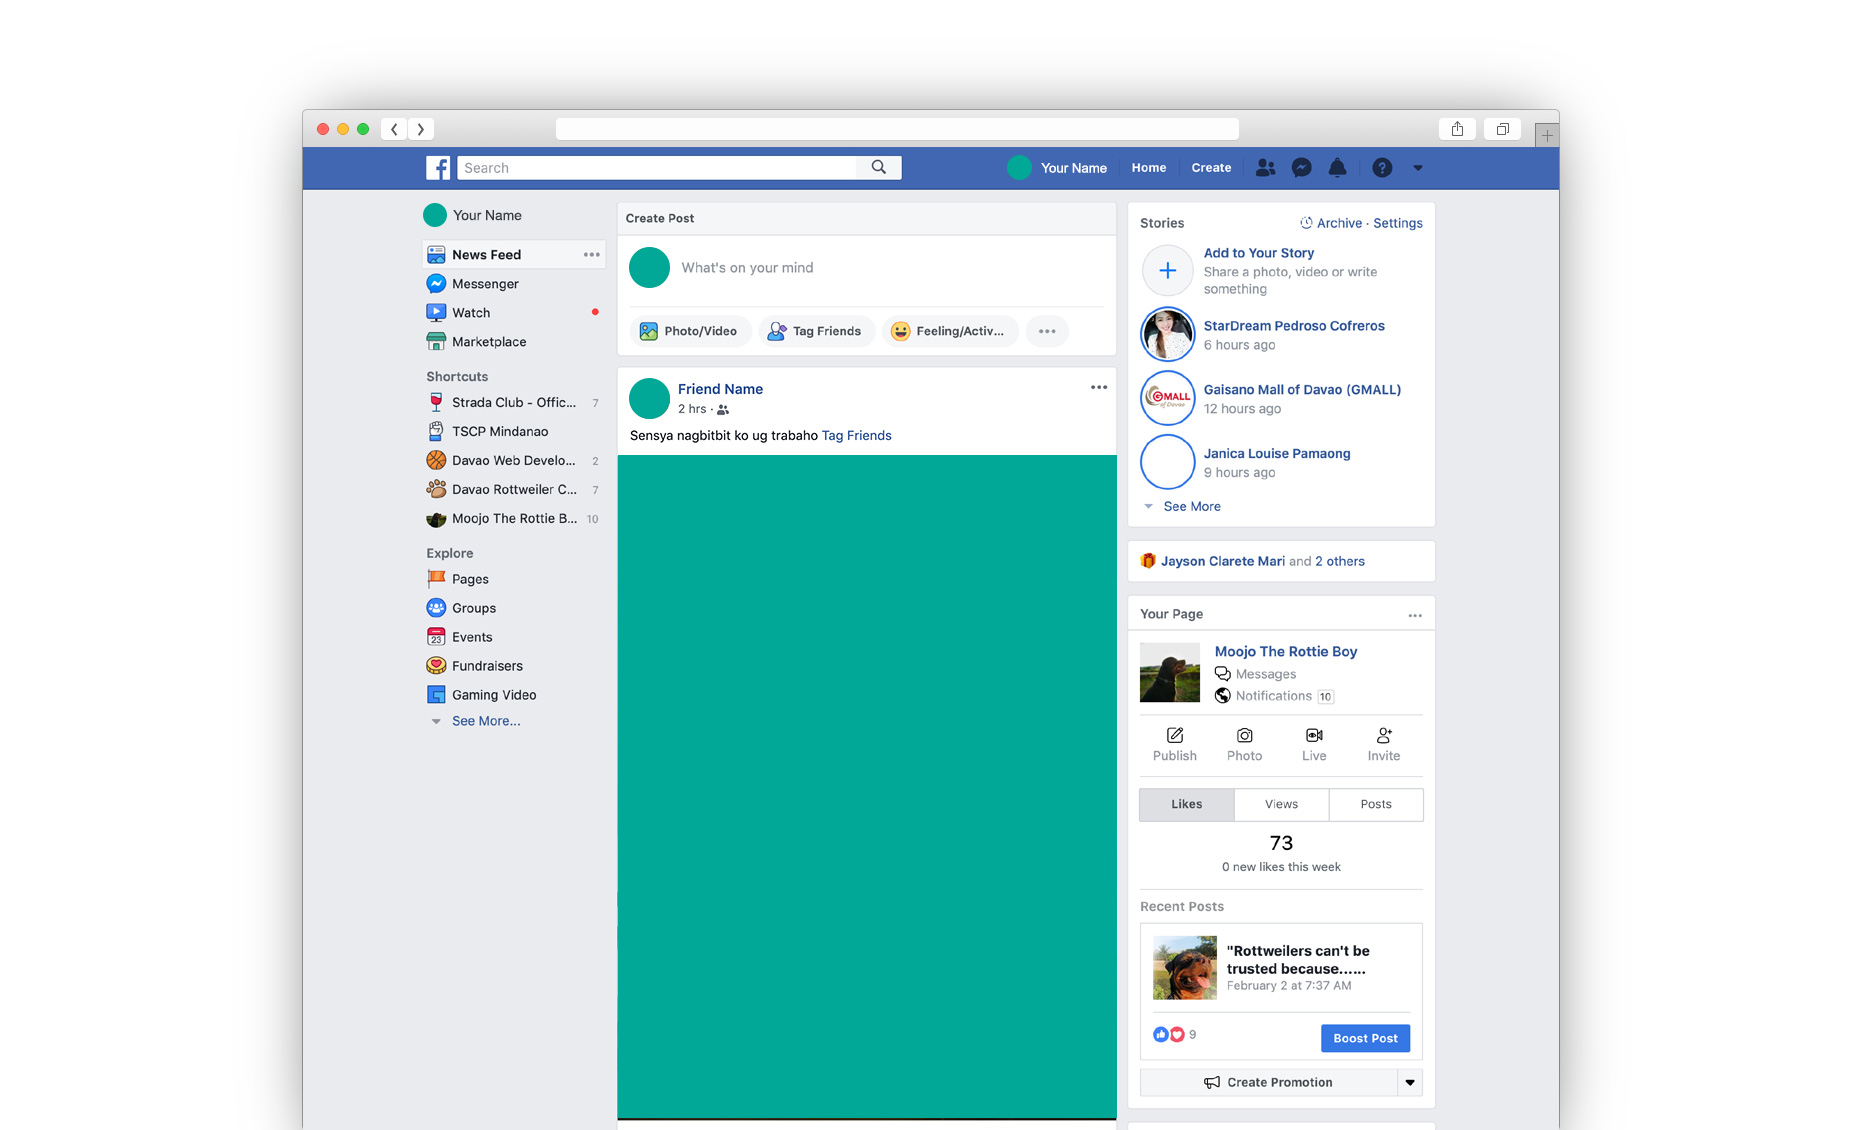 Flow to set up Facebook page